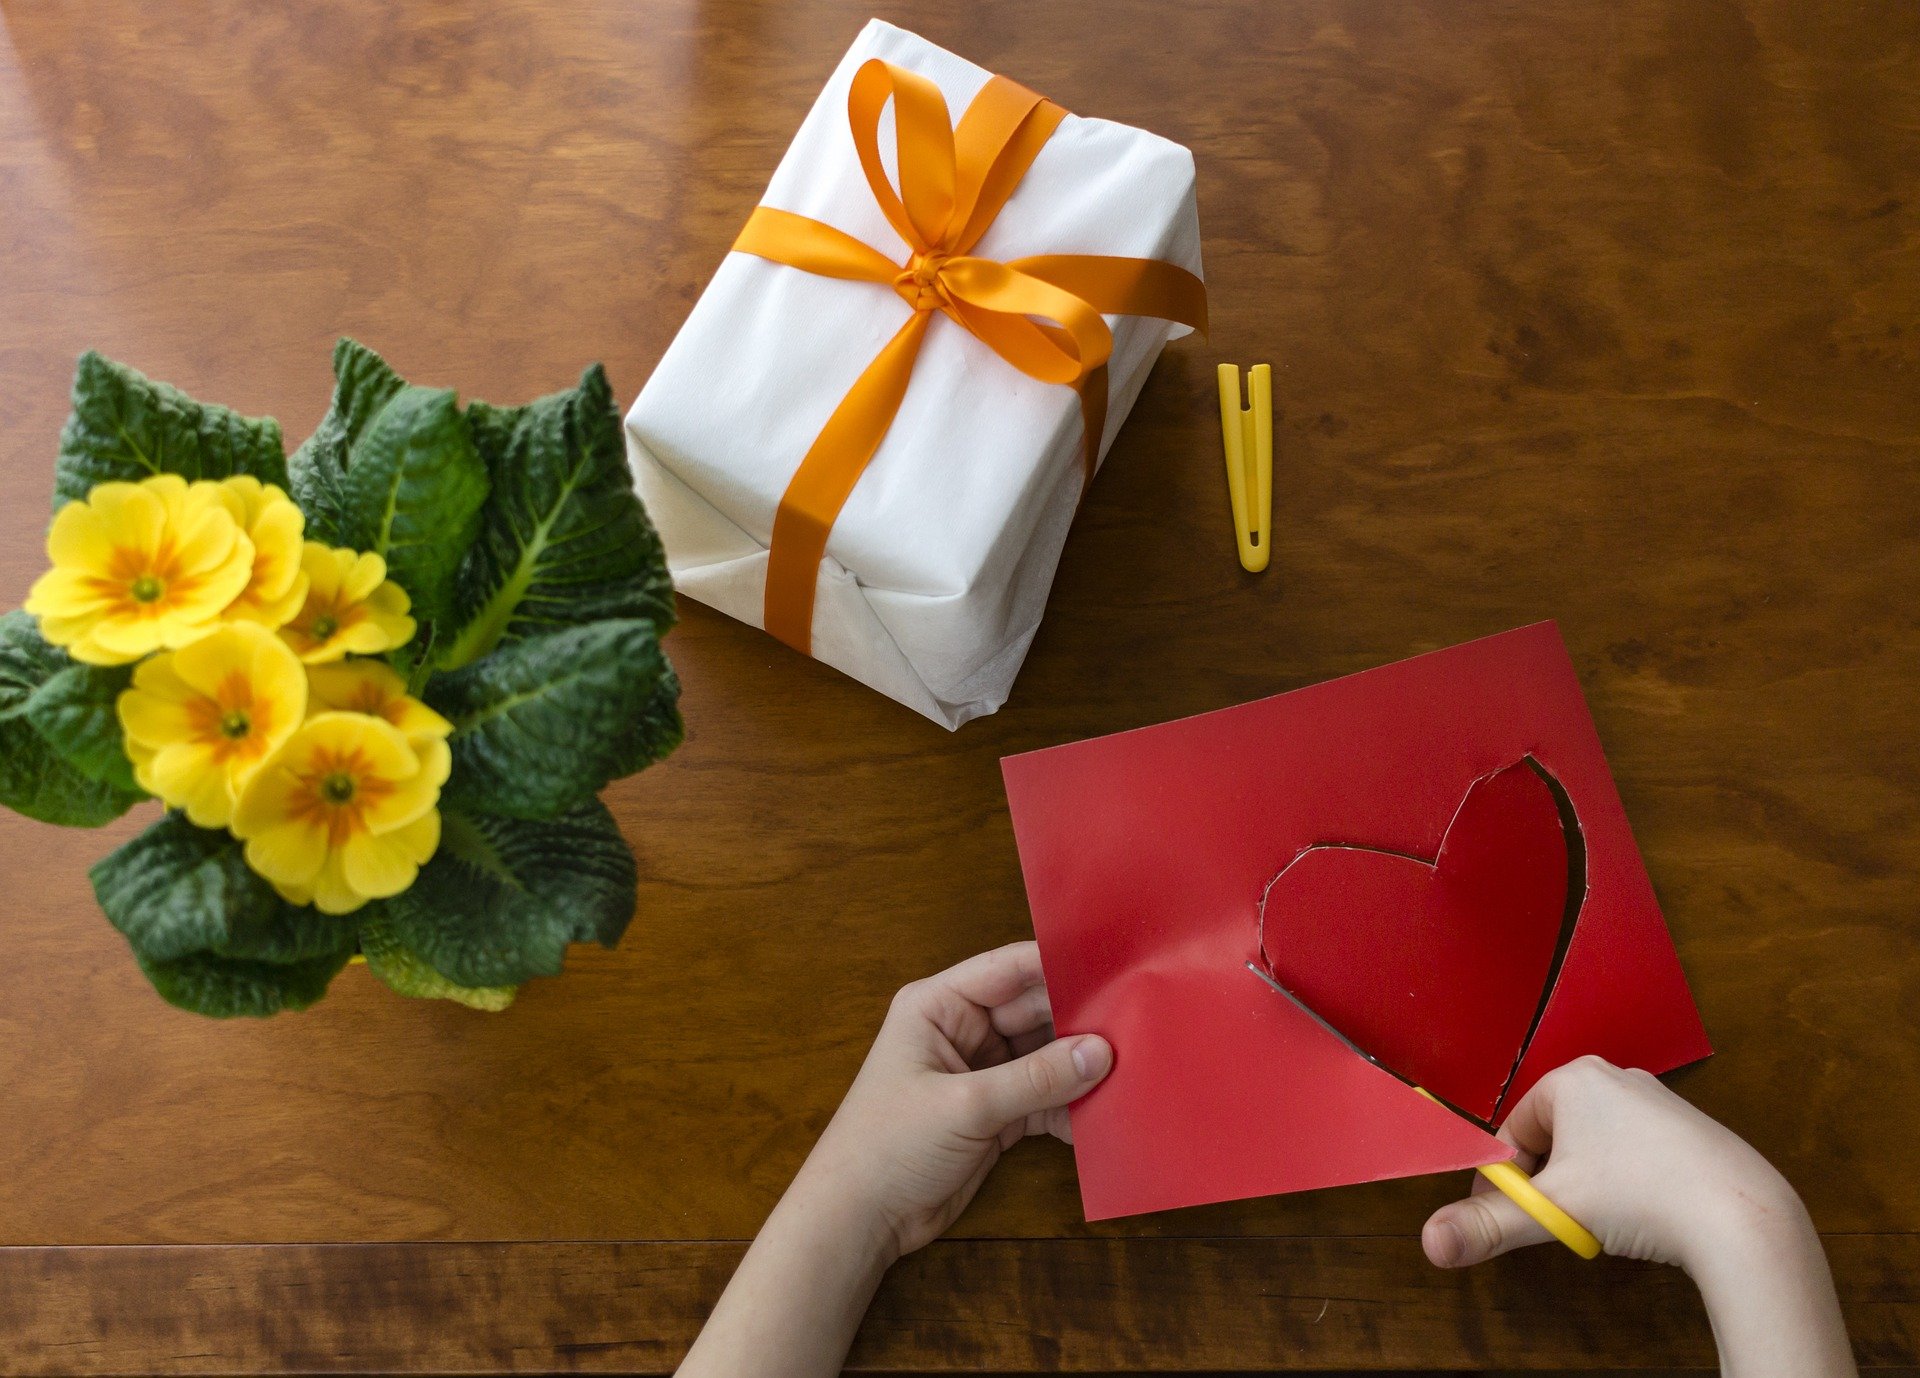 Pictured - A kid cutting out a heart shape next to wrapped gift and flowers | Source: Pixabay